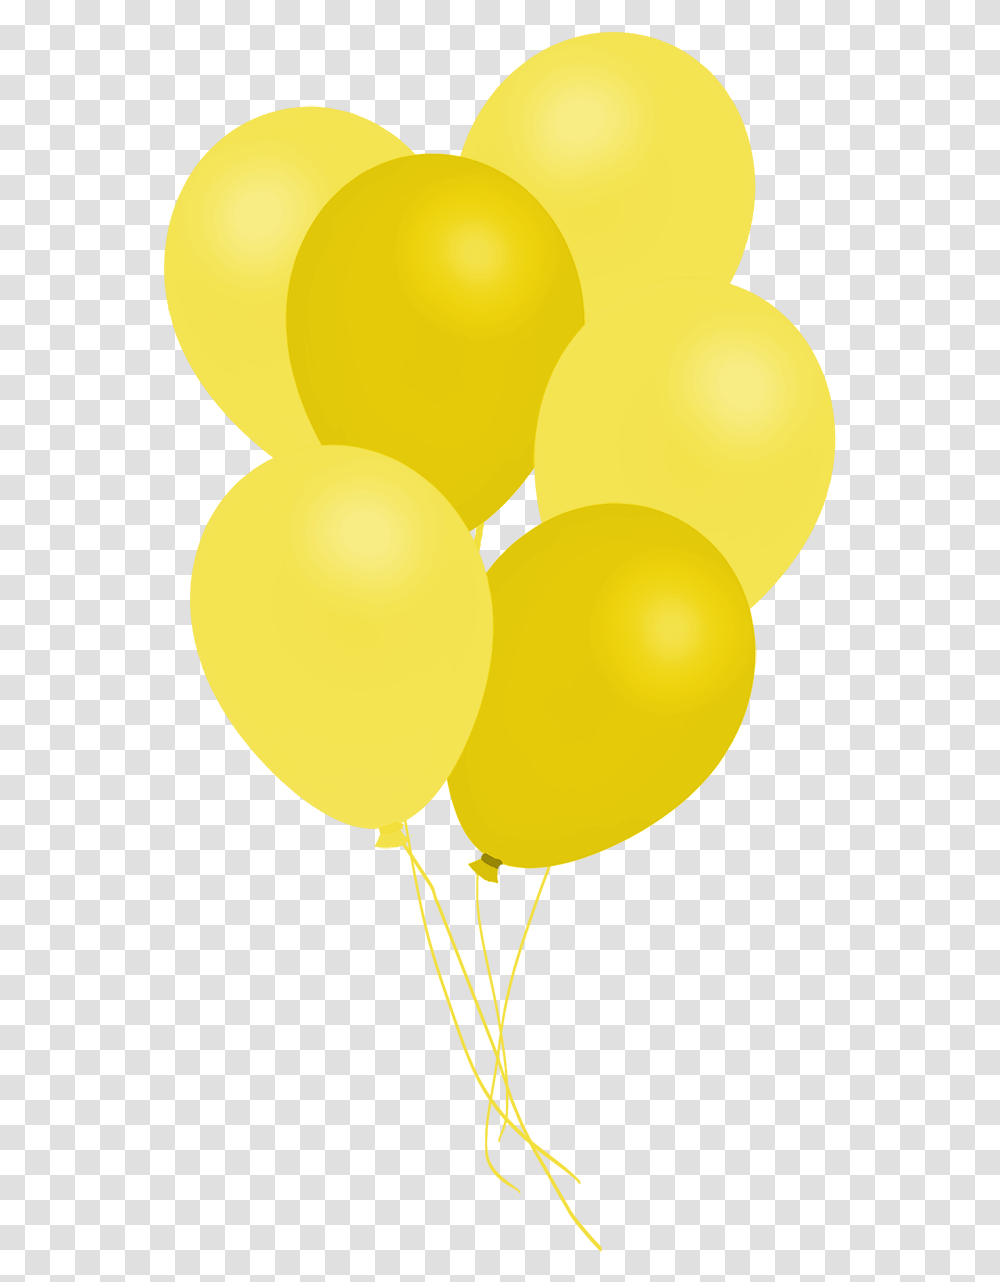 Balloon Clipart Yellow And White Balloons Transparent Png